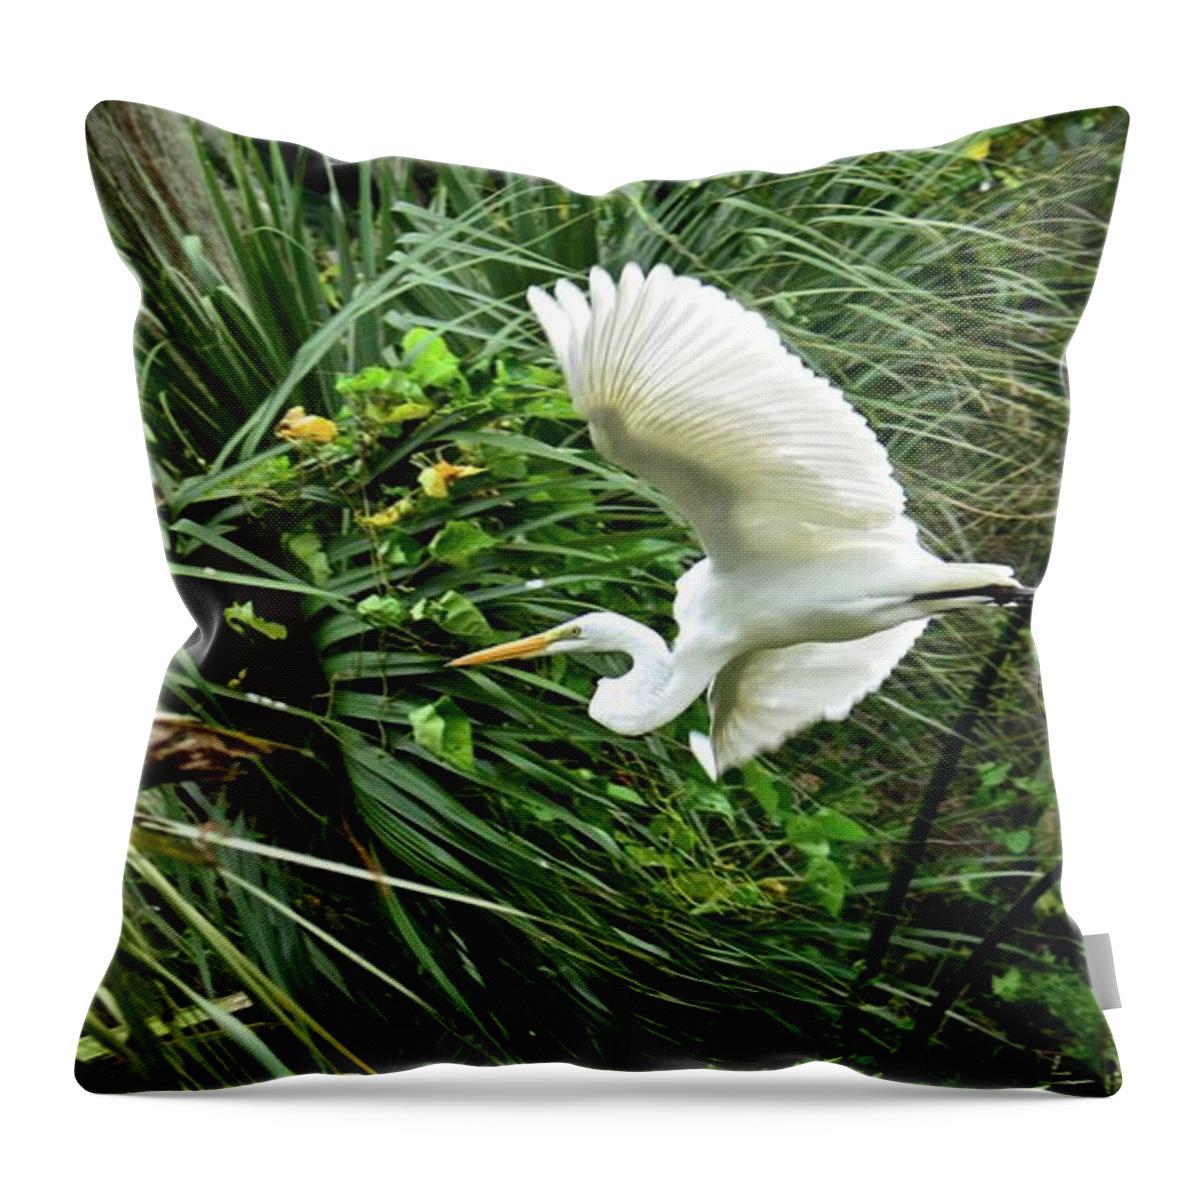 Egret Throw Pillow featuring the photograph Great Egret In Flight by Carol Bradley